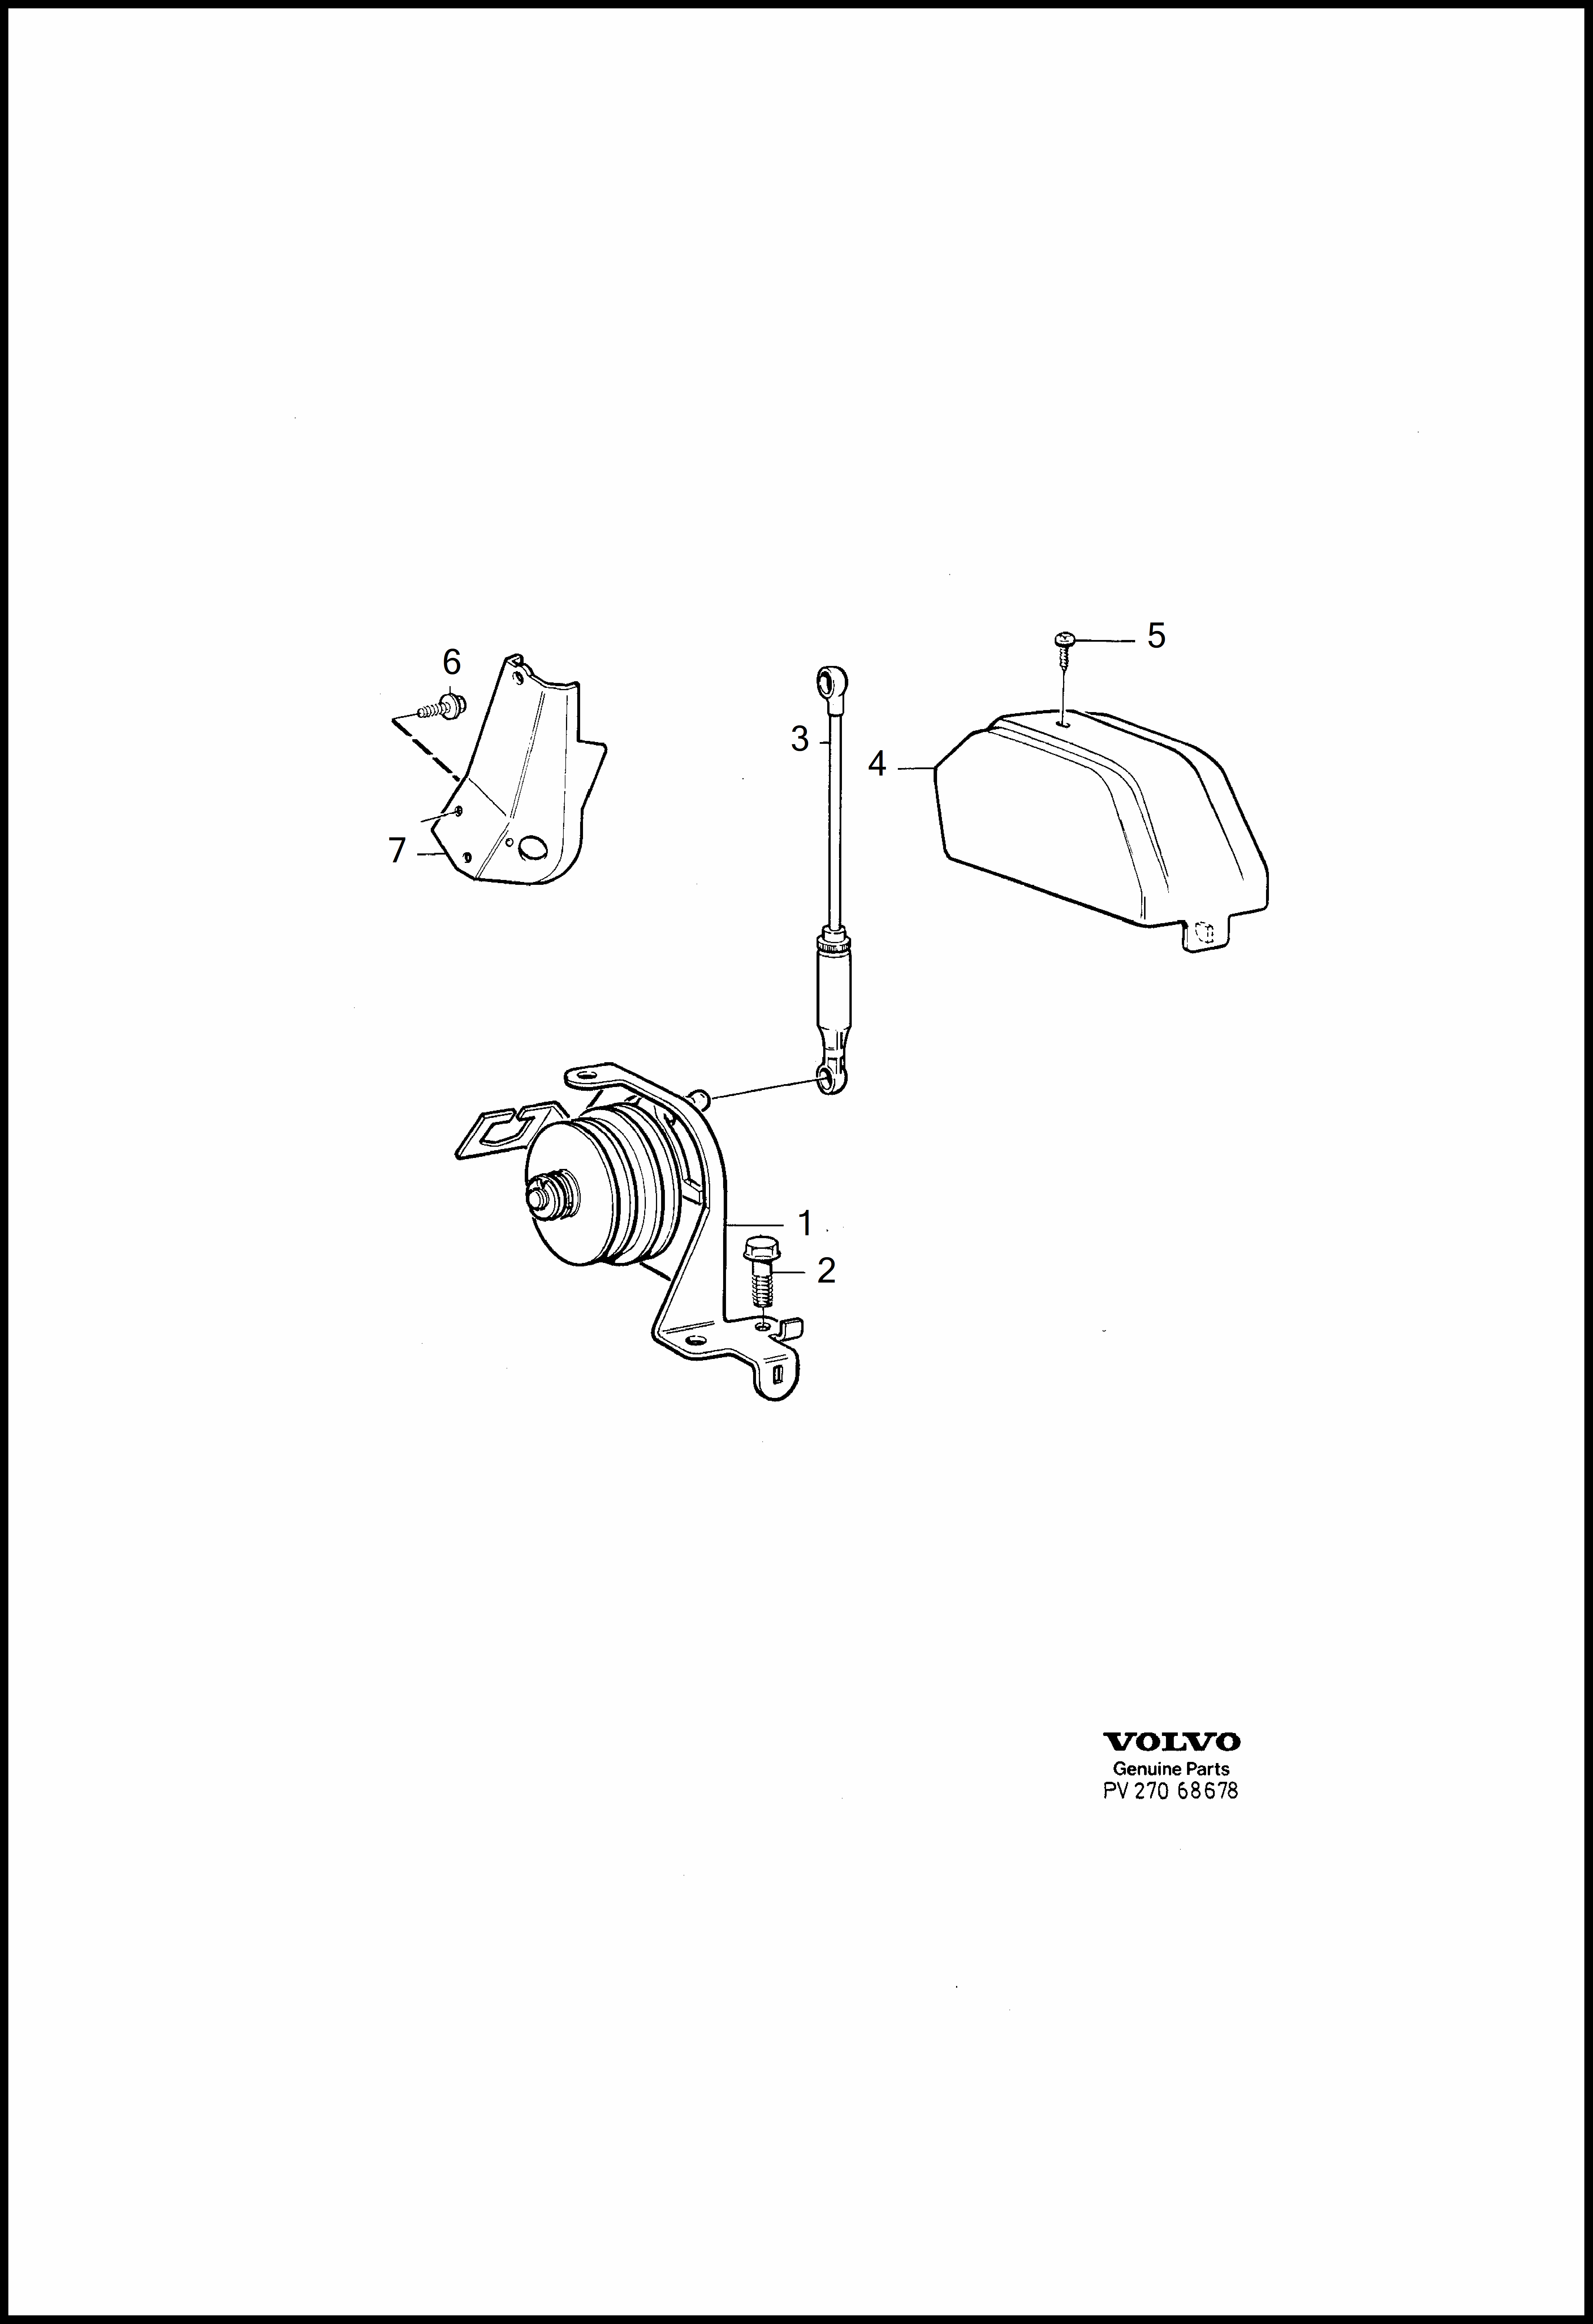 control pulley with fittings for Volvo 960 960